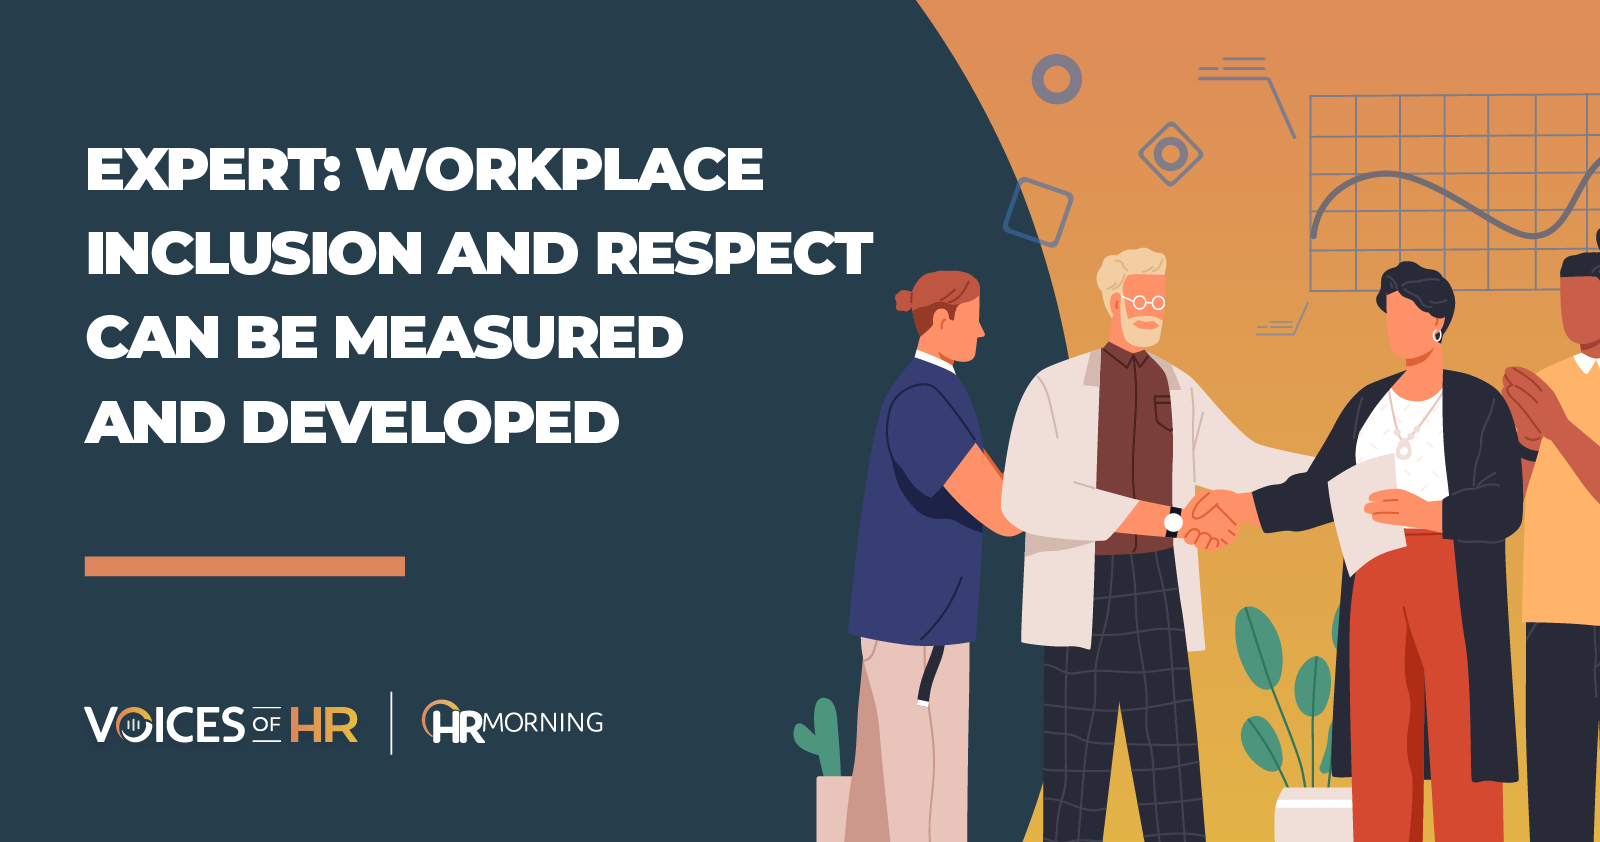 Expert: Workplace inclusion and respect can be measured and developed